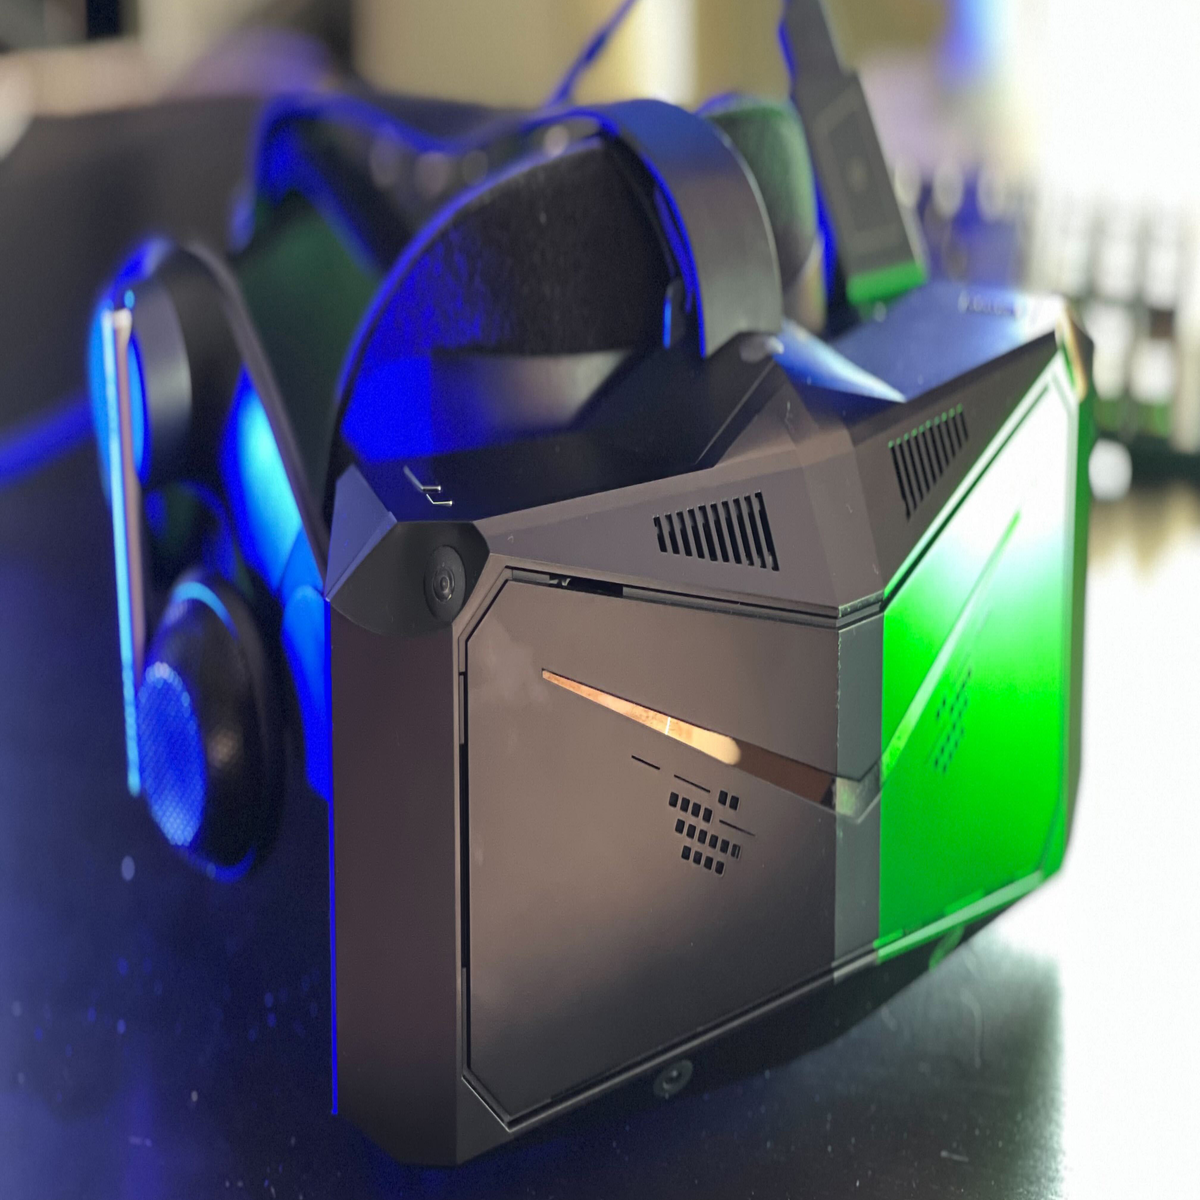 Pimax Launches 'Crystal-Sim': More Refresh-Rate Options, No